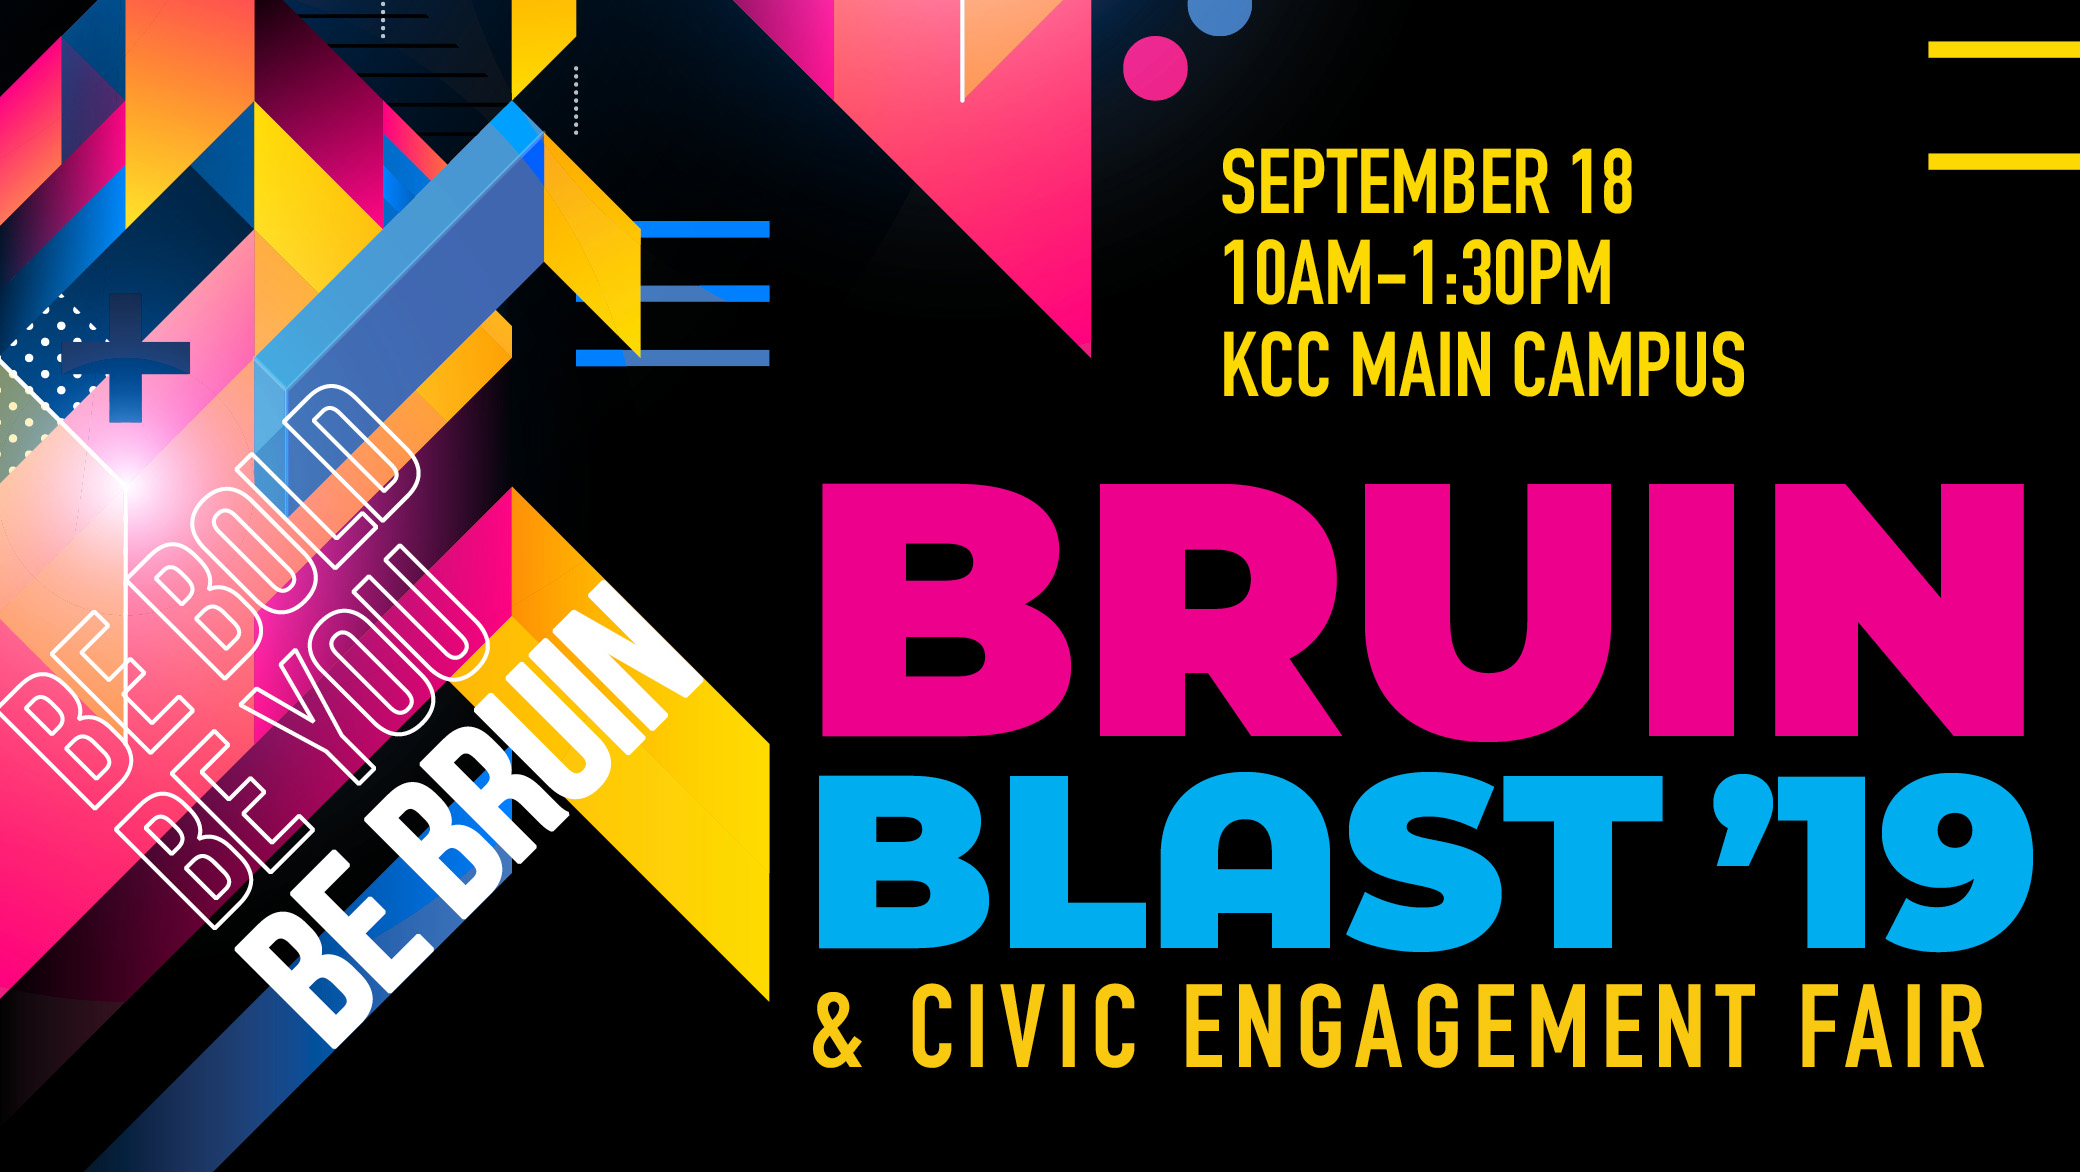 A text slide with information about KCC's 2019 Bruin Blast and Civic Engagement Fair.